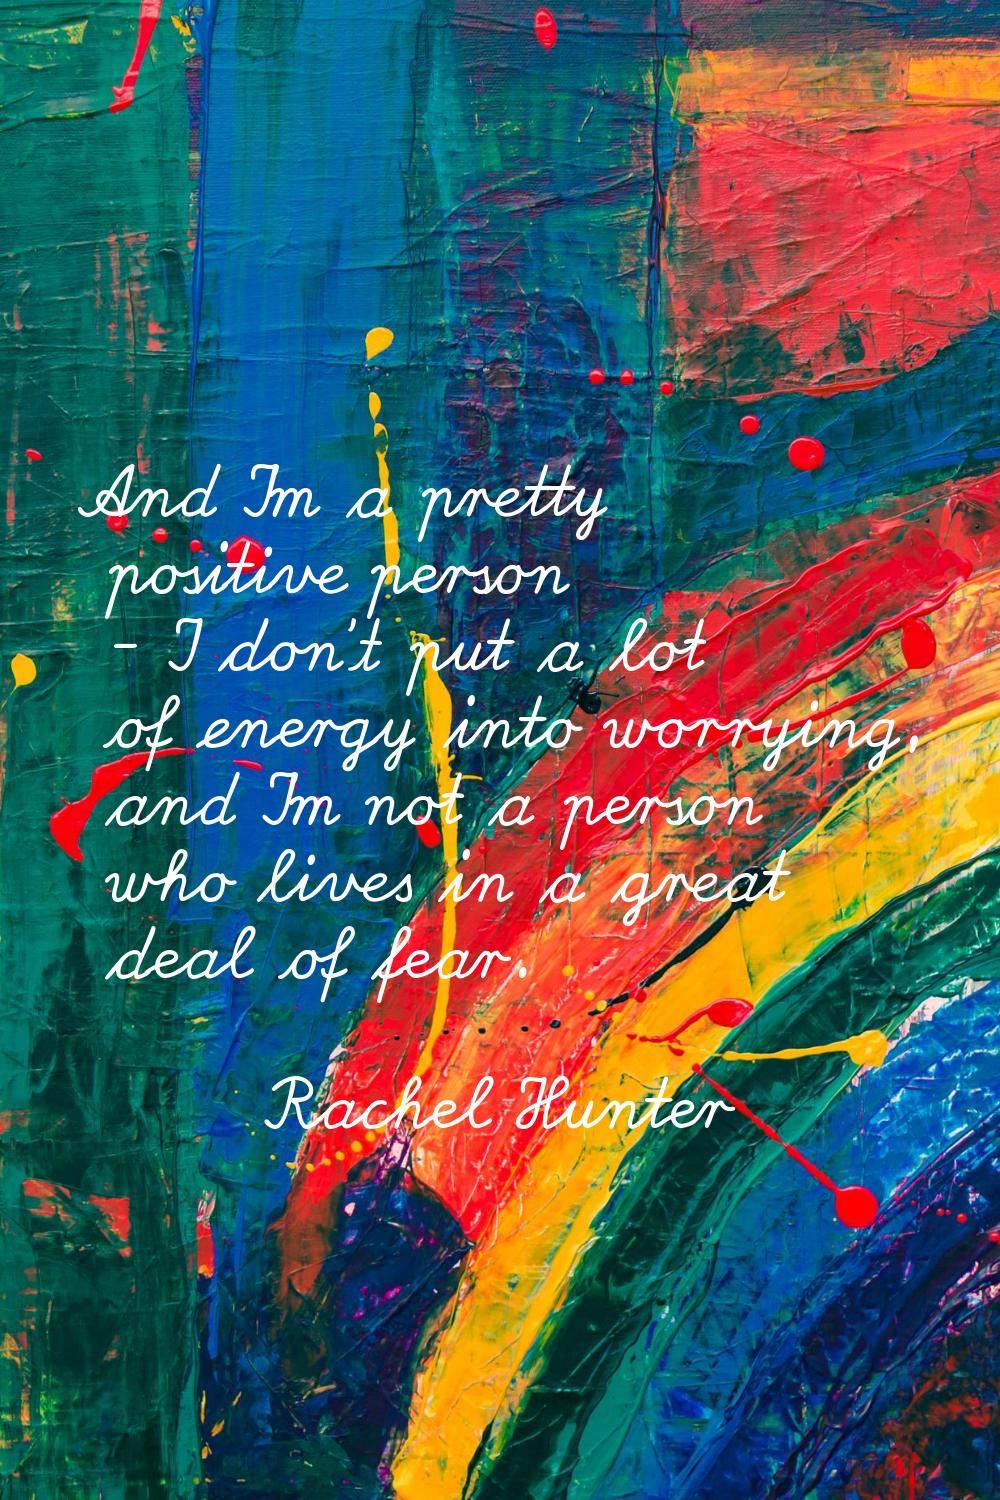 And I'm a pretty positive person - I don't put a lot of energy into worrying, and I'm not a person 